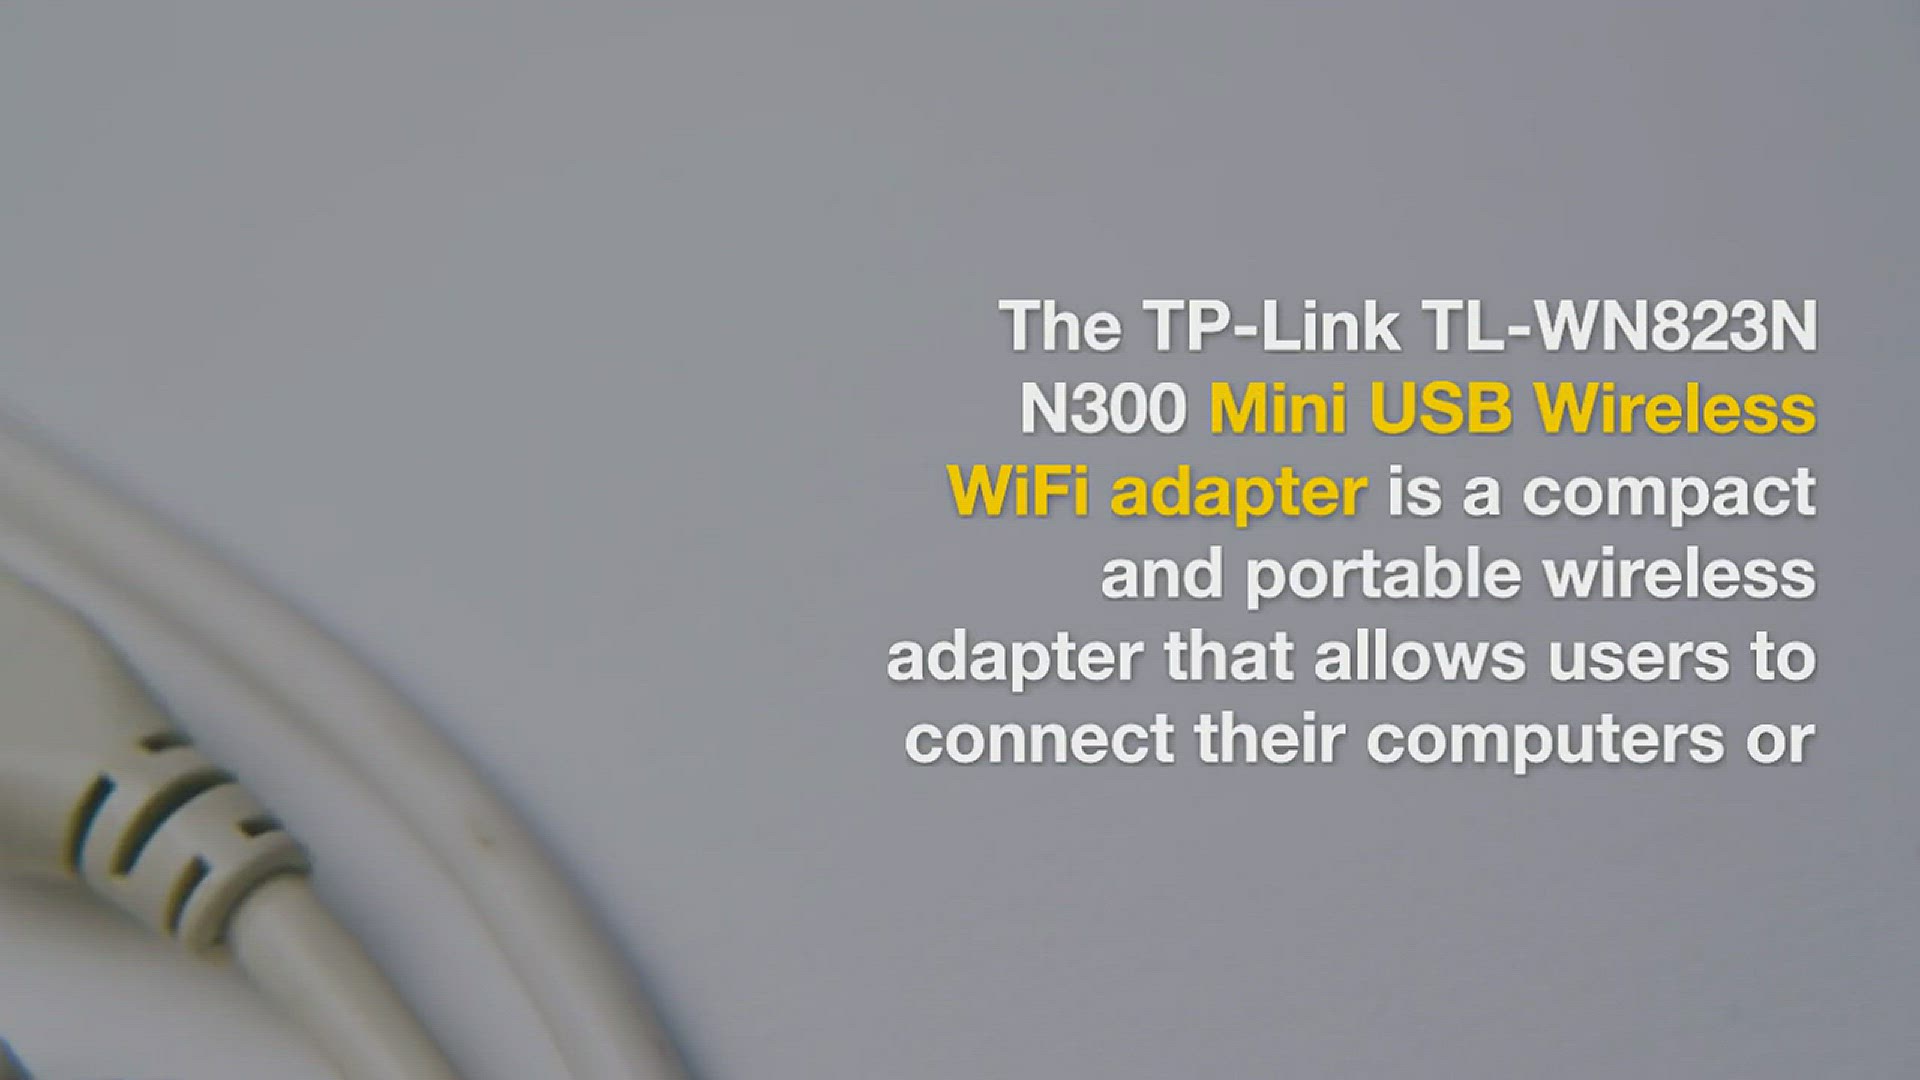 picture) Network is USB Wireless What Adapter? (with a